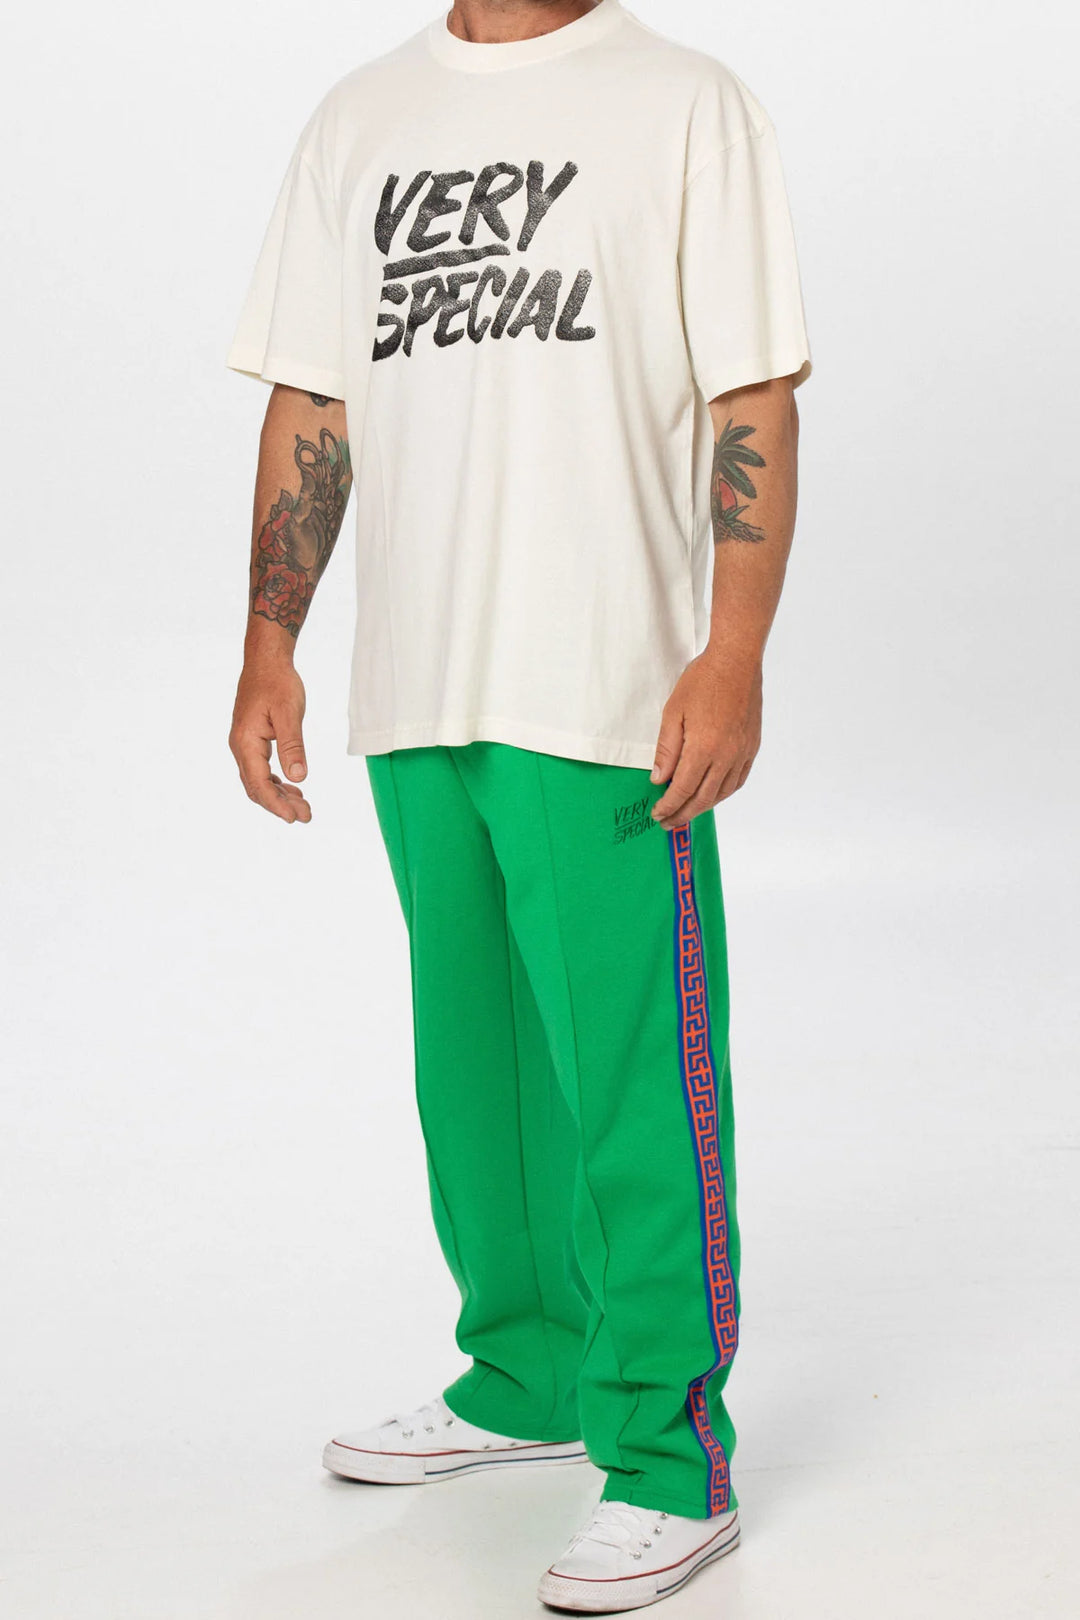 Something Very Special - Geo Track Pants 3.0 - Kelly Green